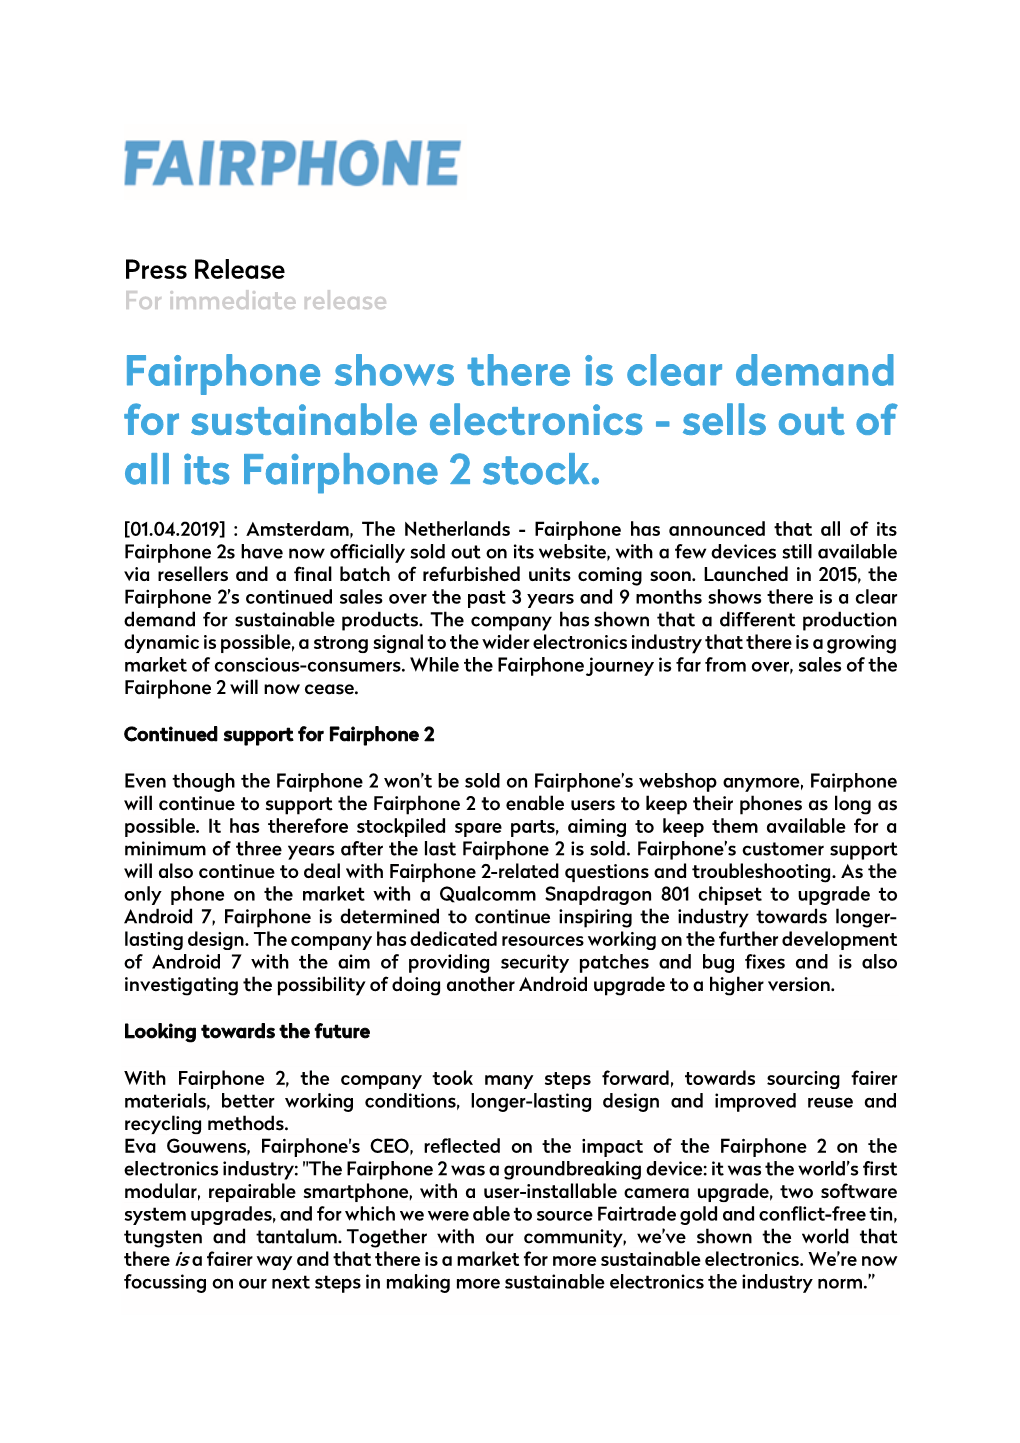 Fairphone Shows There Is Clear Demand for Sustainable Electronics - Sells out of All Its Fairphone 2 Stock